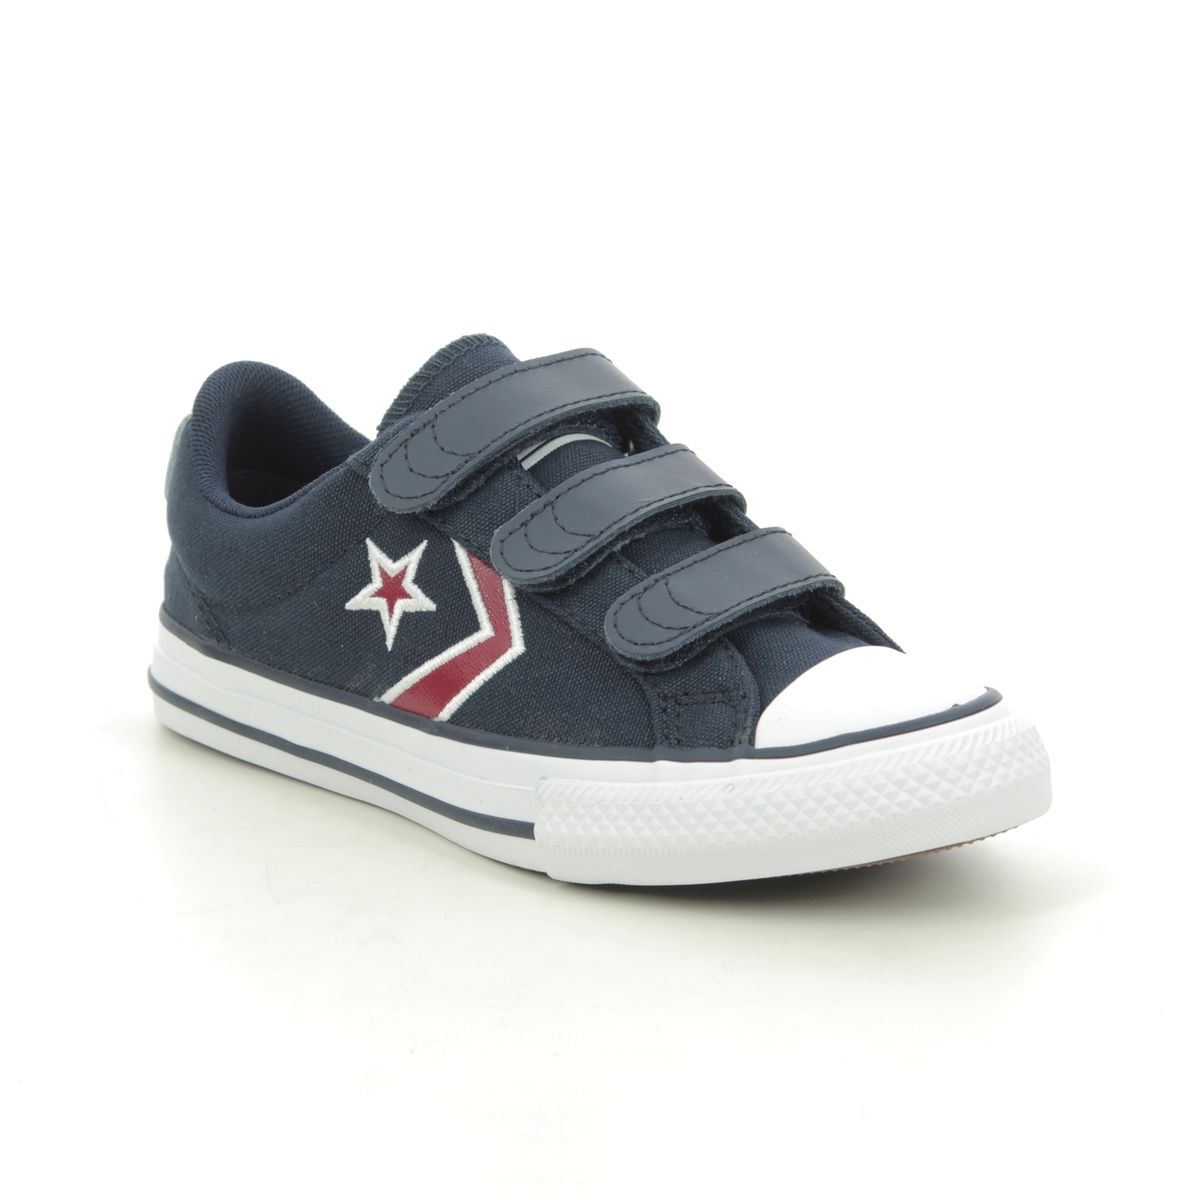 Converse Allstar 3v Navy Red Kids Boys Trainers 666960C-001 in a Plain Canvas in Size 1